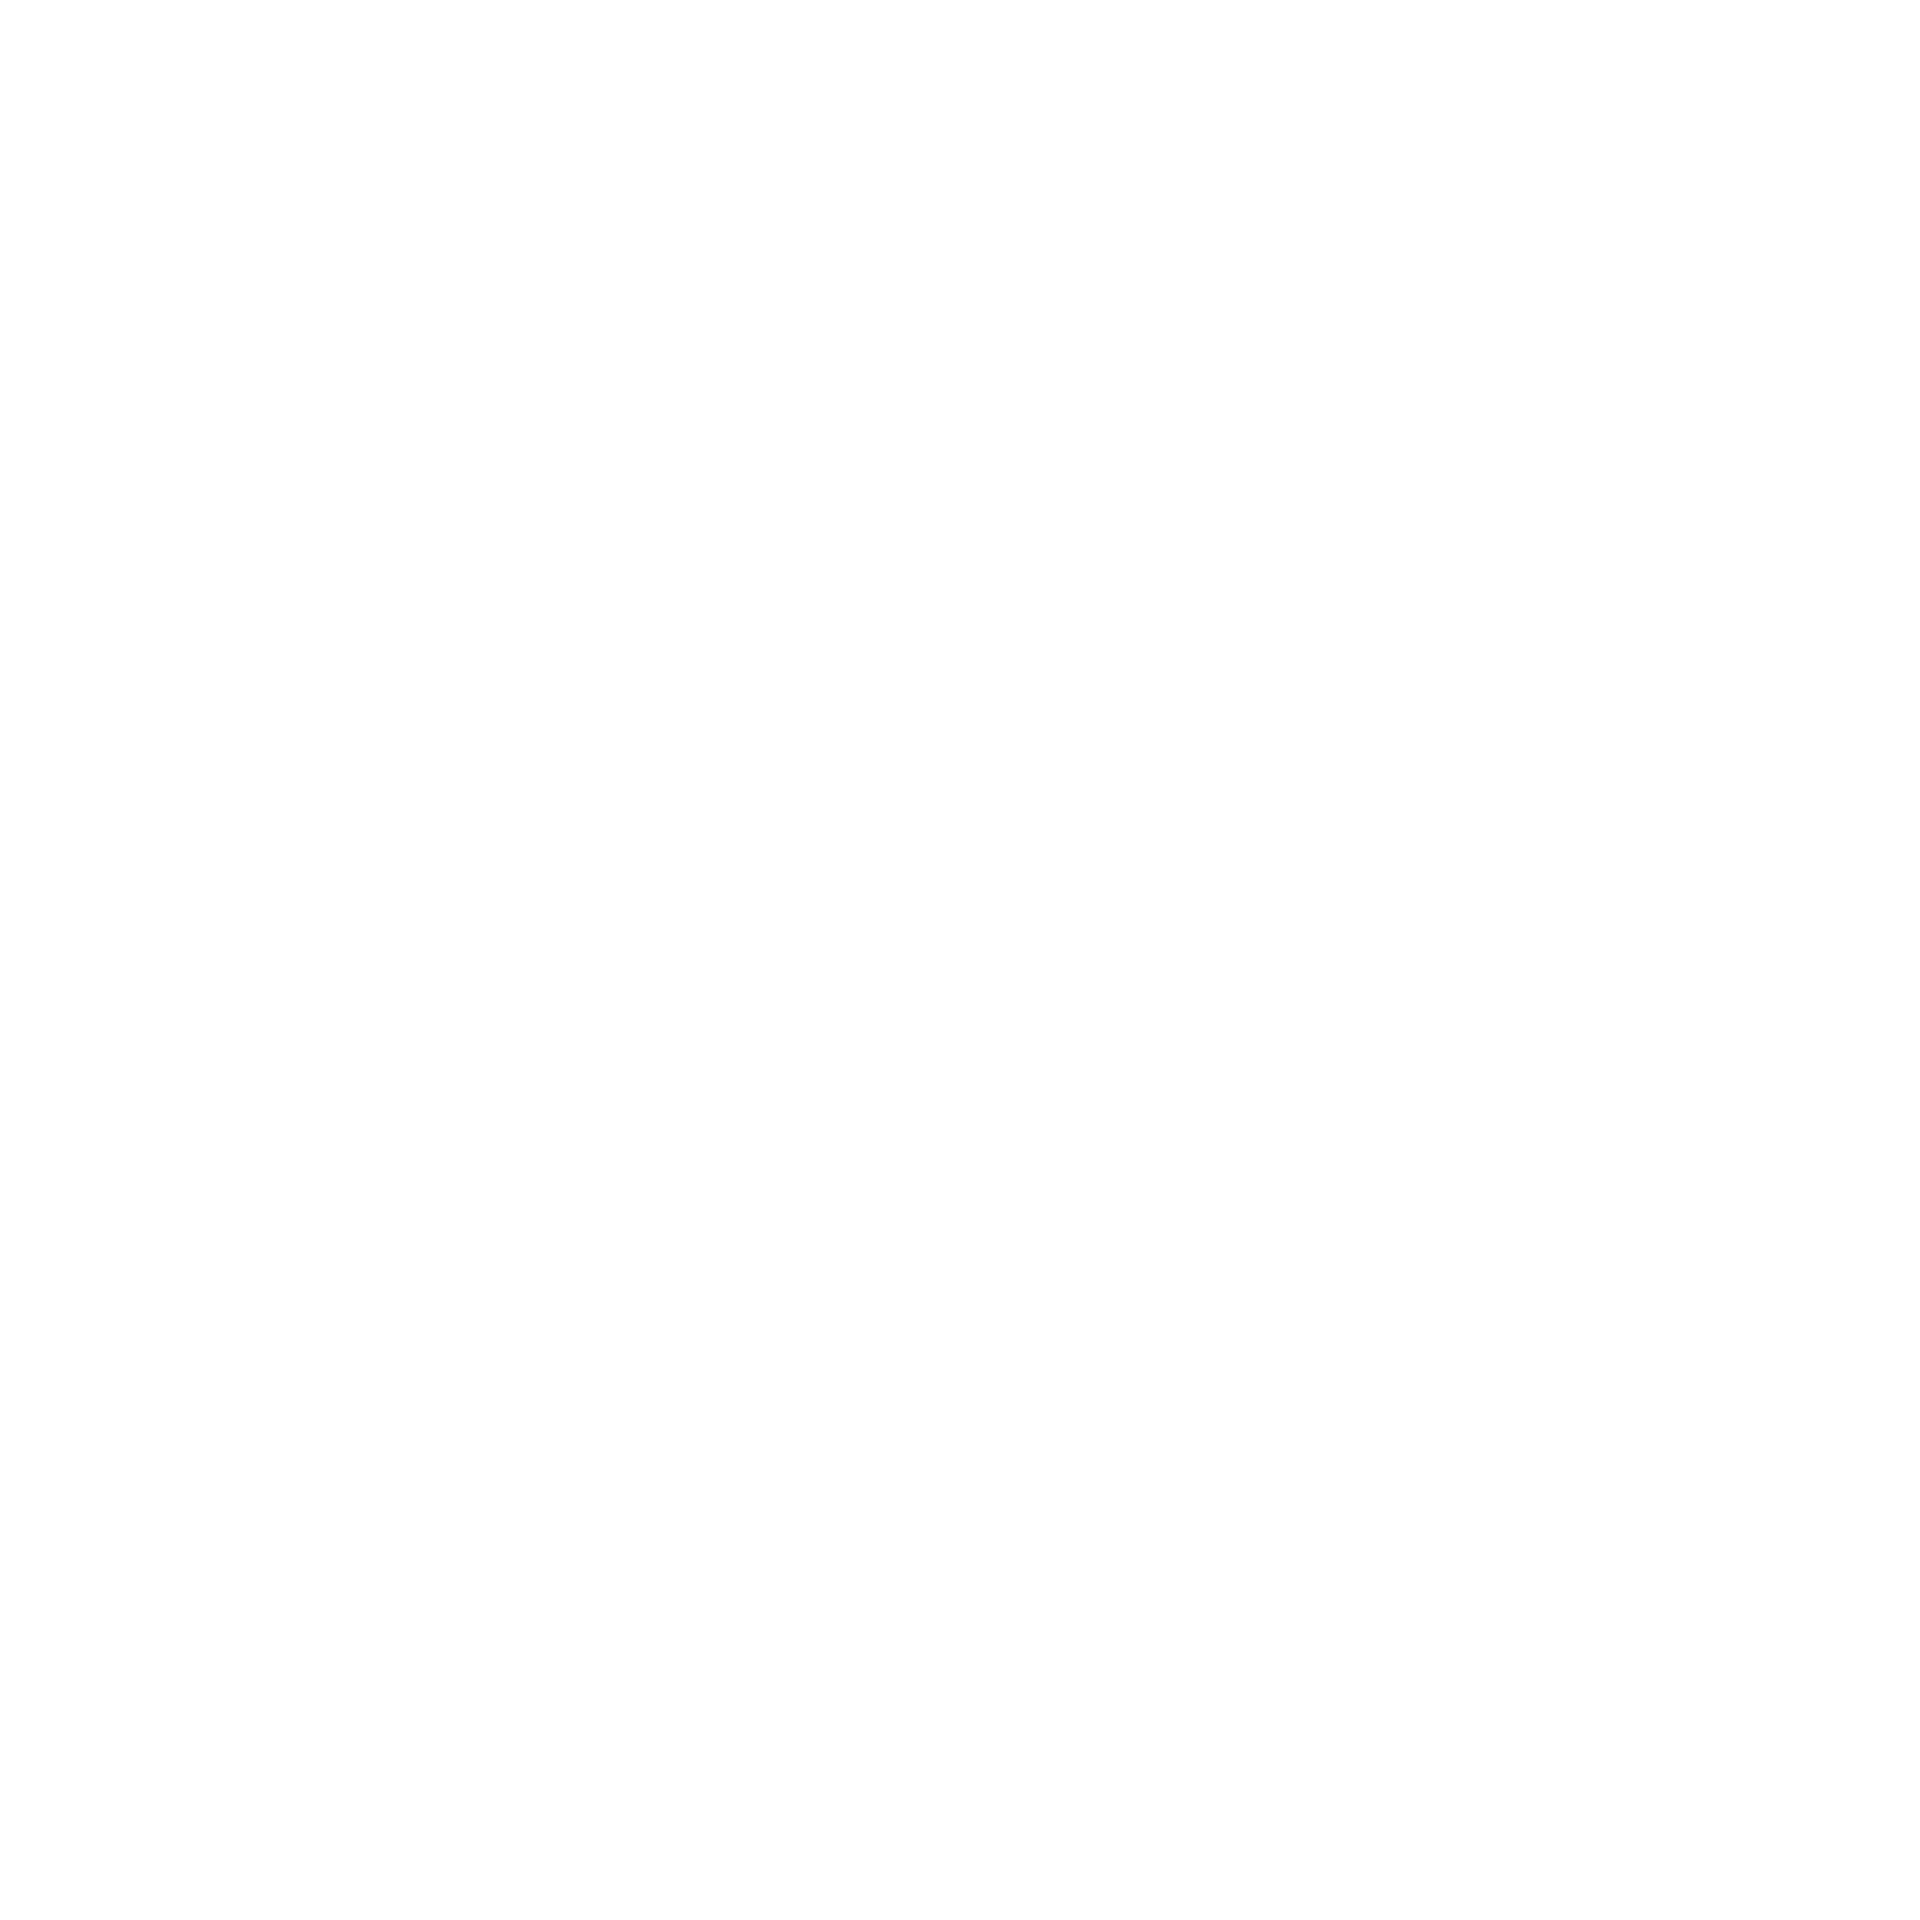 Félix Gains 90% More Confidence Accepting Payments From Users With Low Digital Footprints